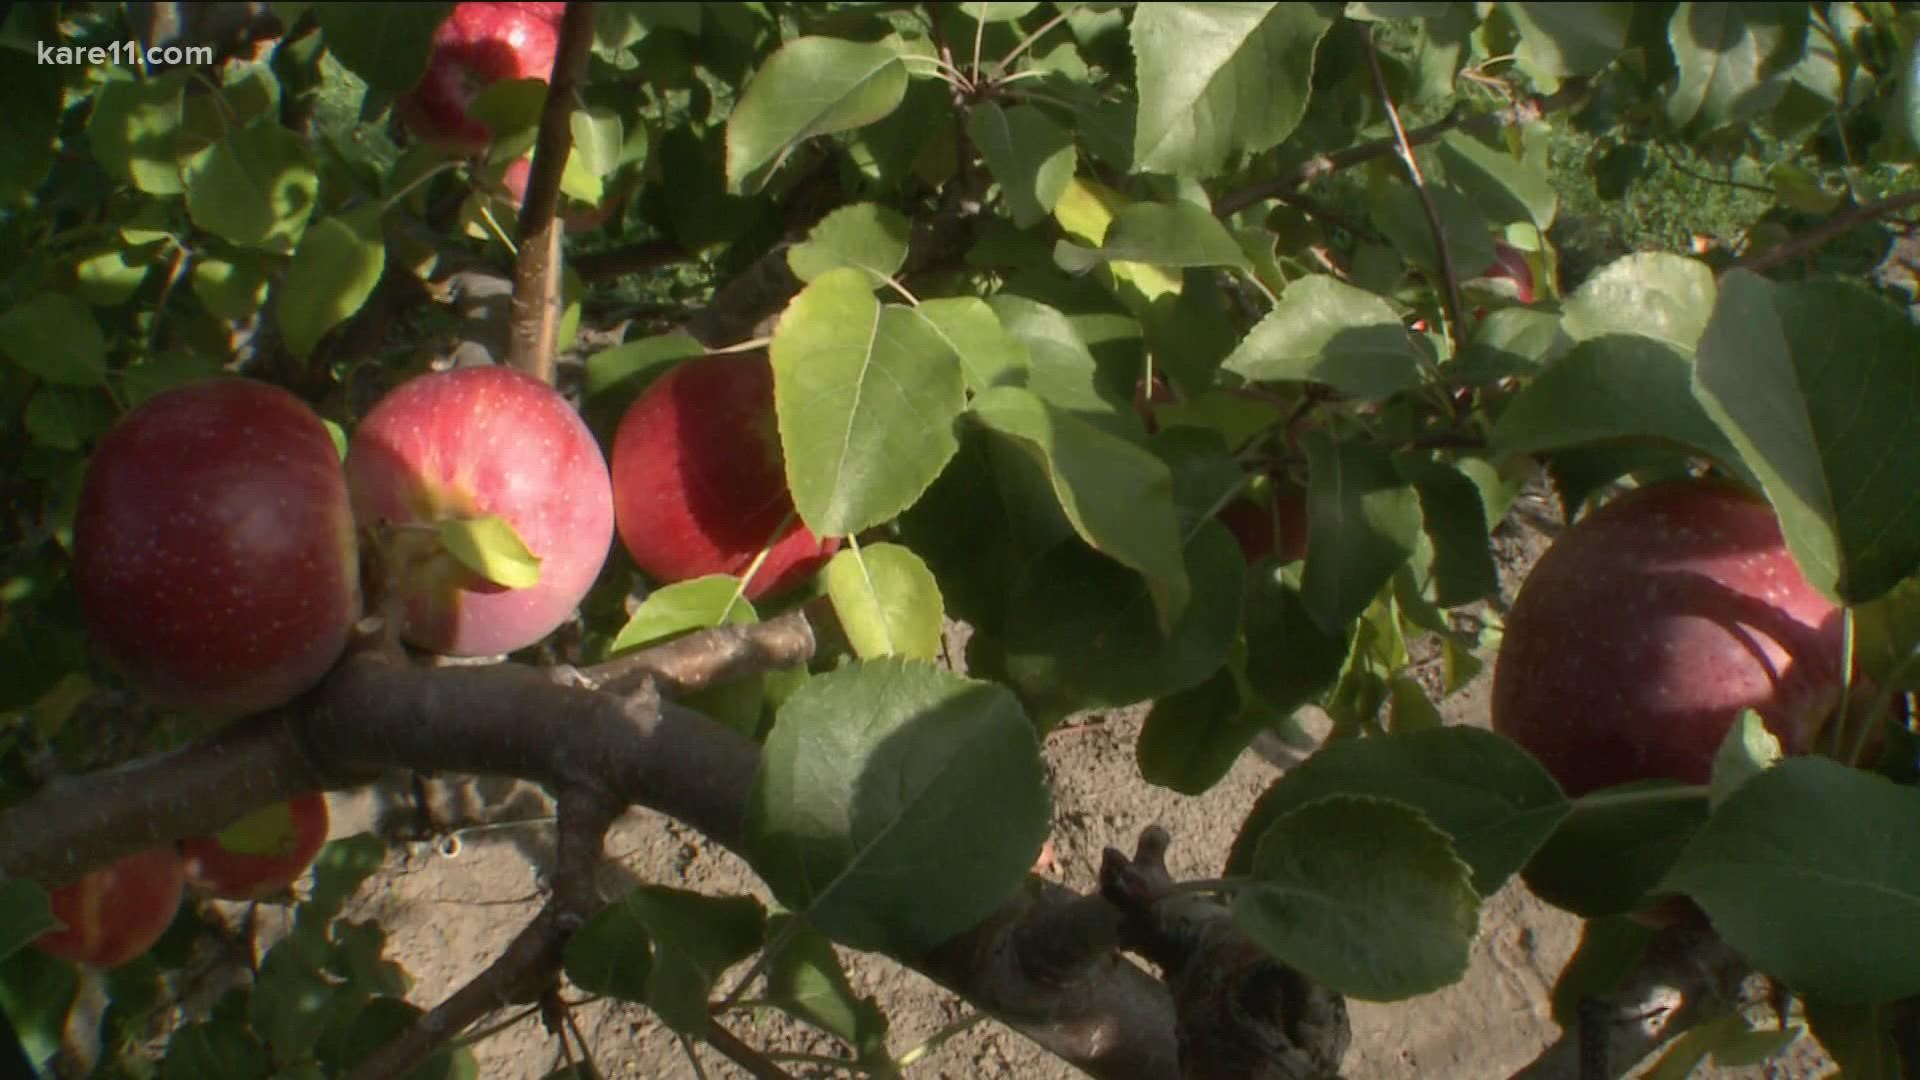 David Bedford, University of Minnesota researcher and apple breeder, said they have the greatest number of the world’s supply of Triumph apple trees: four.